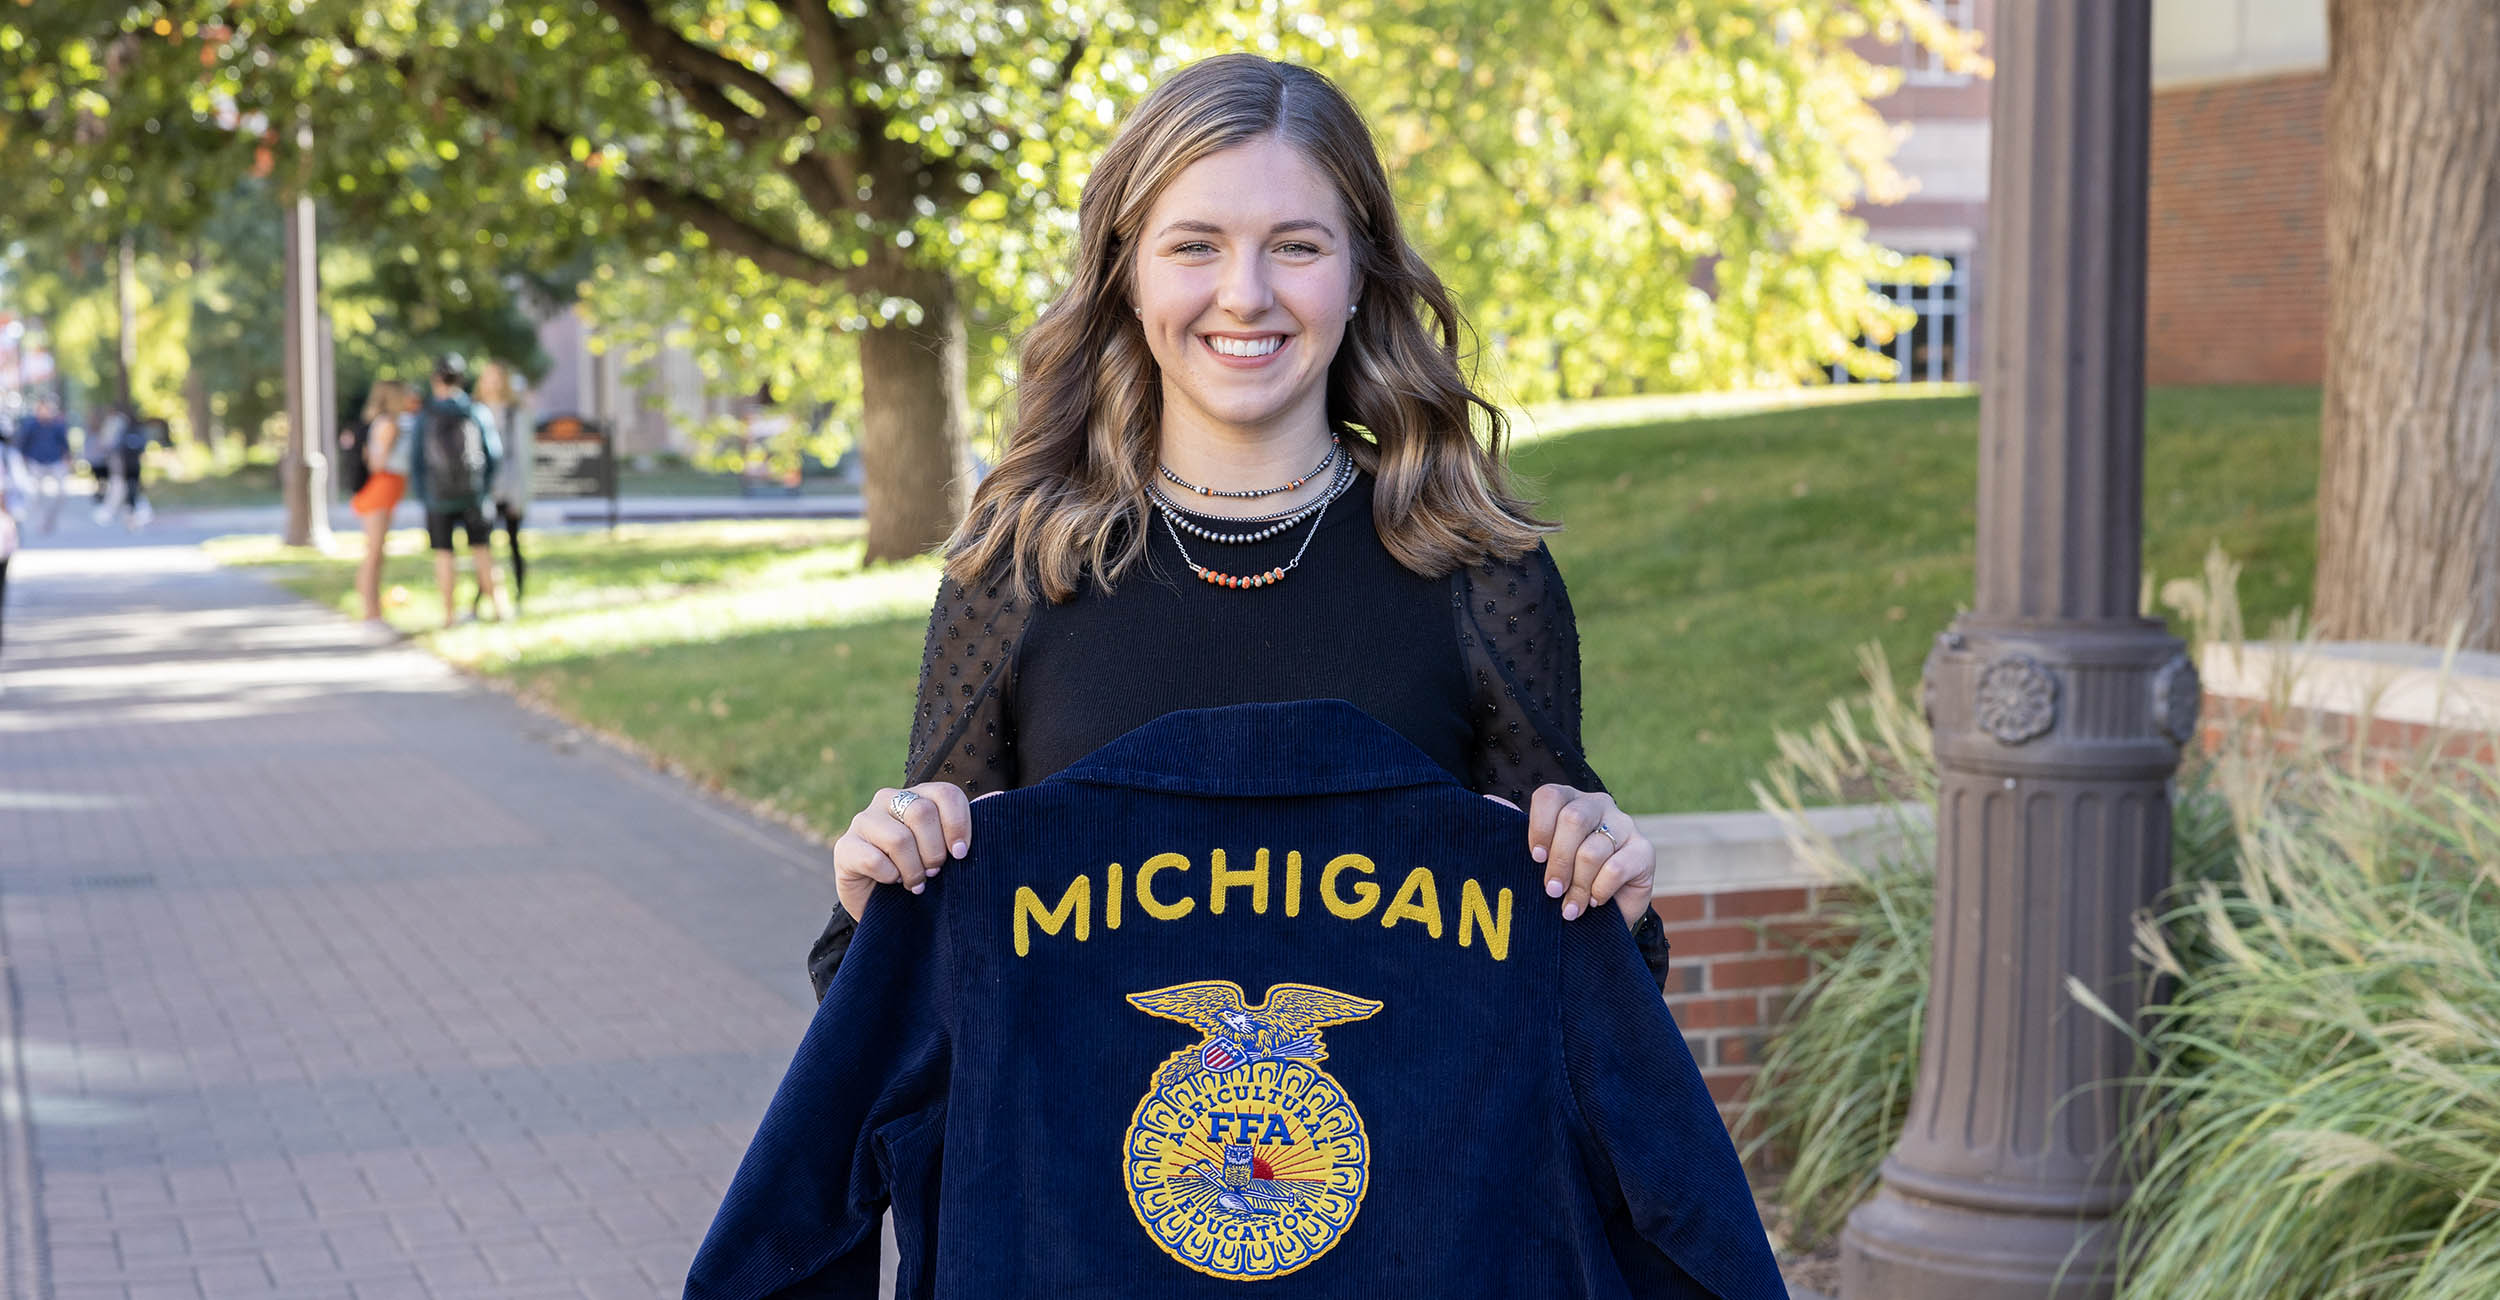 Ferguson College of Agriculture student Jackson elected National FFA  President